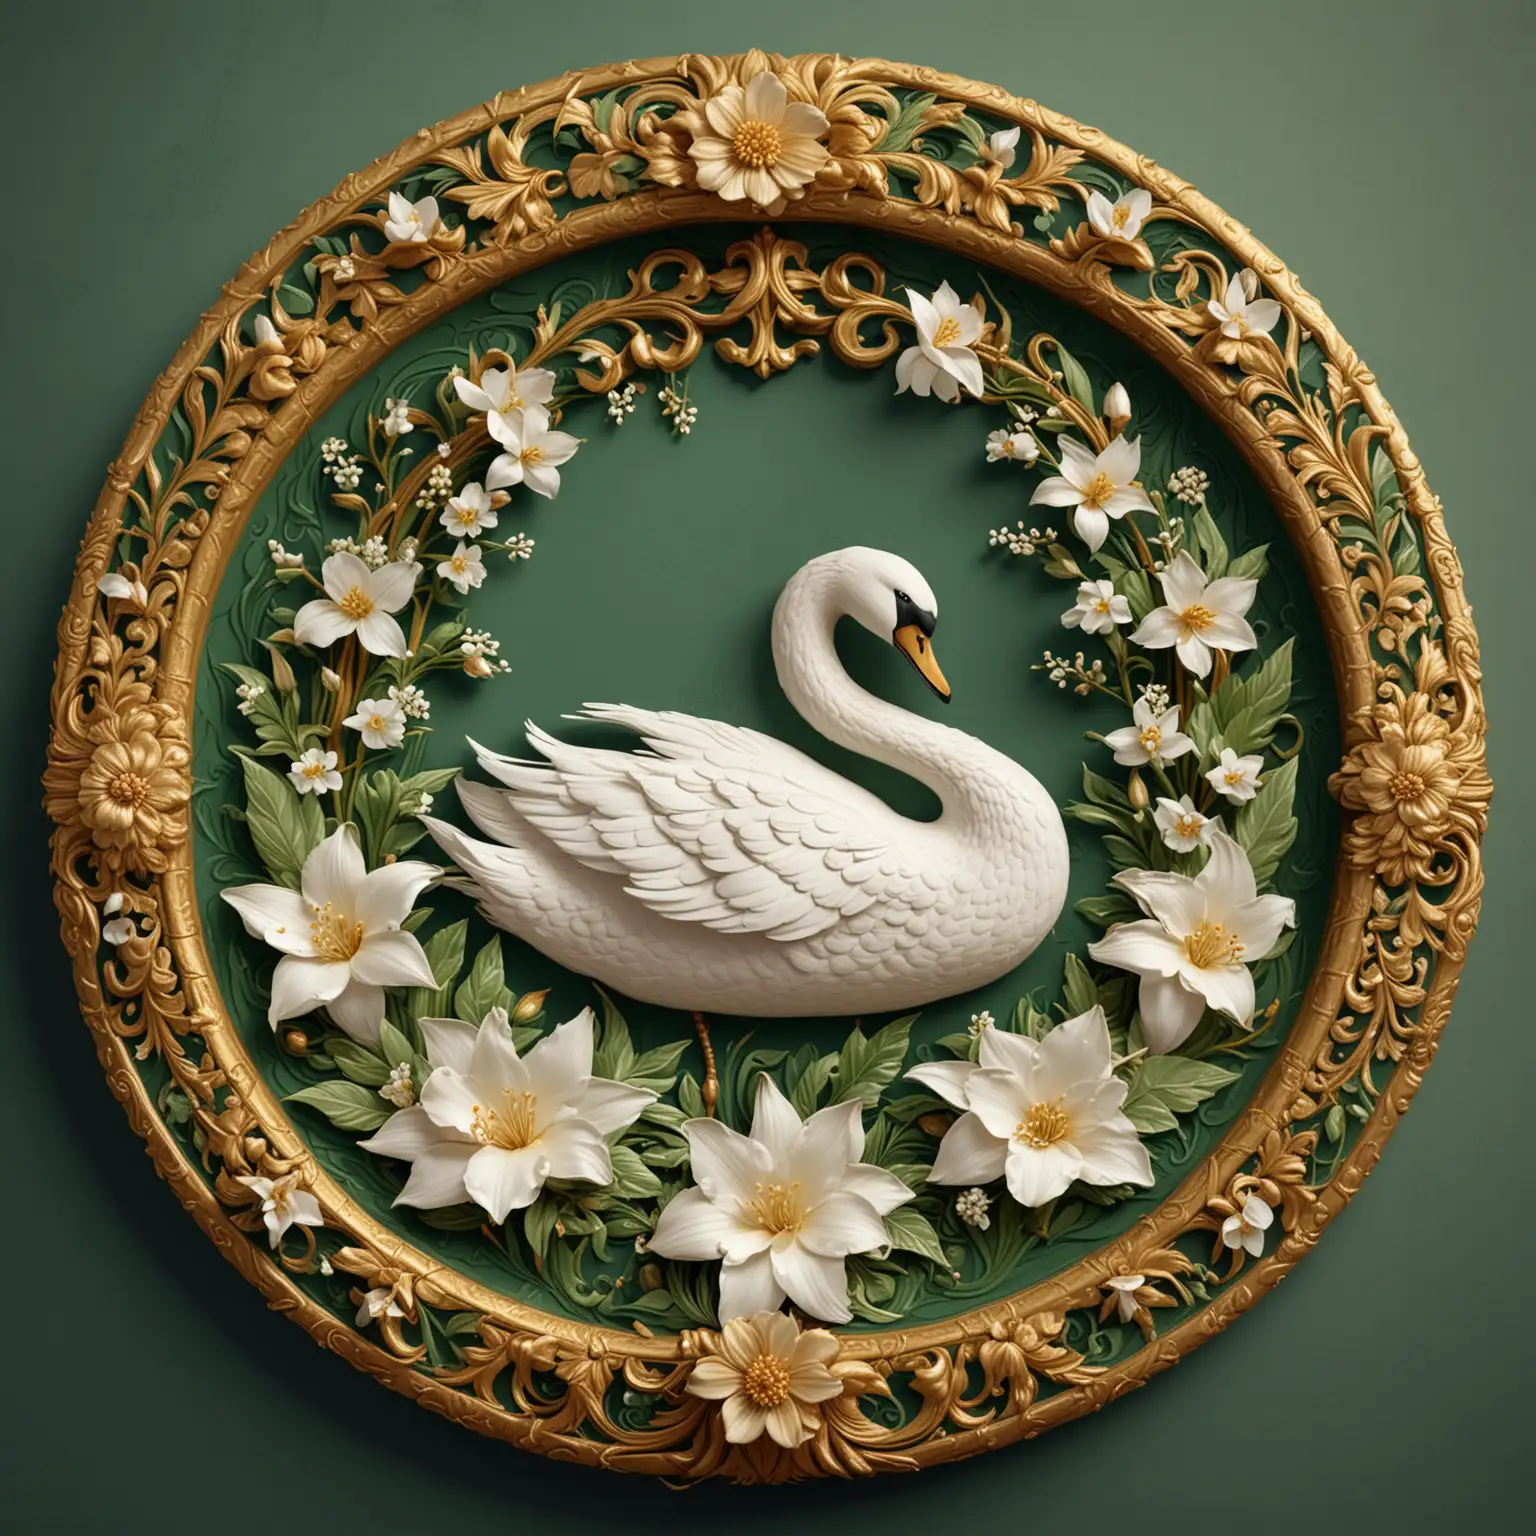 Ancient-Logo-Green-Circle-with-Golden-Carvings-White-Swan-and-Jasmine-Flowers